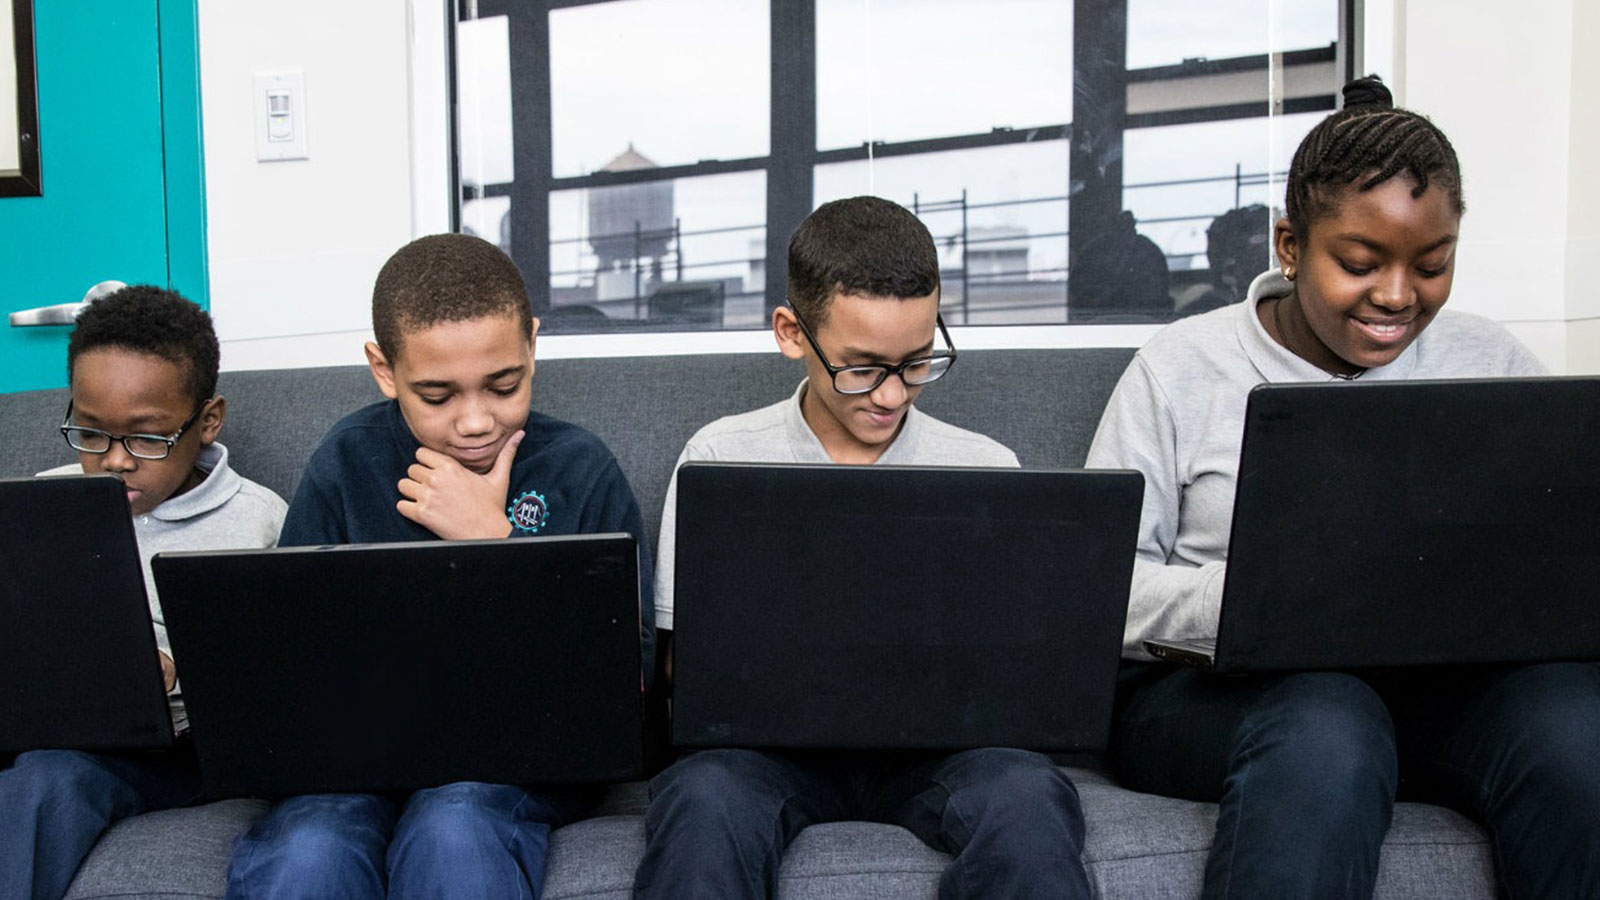 Four students take an assessment on their computers that will inform their teacher's approach thanks to data interoperability